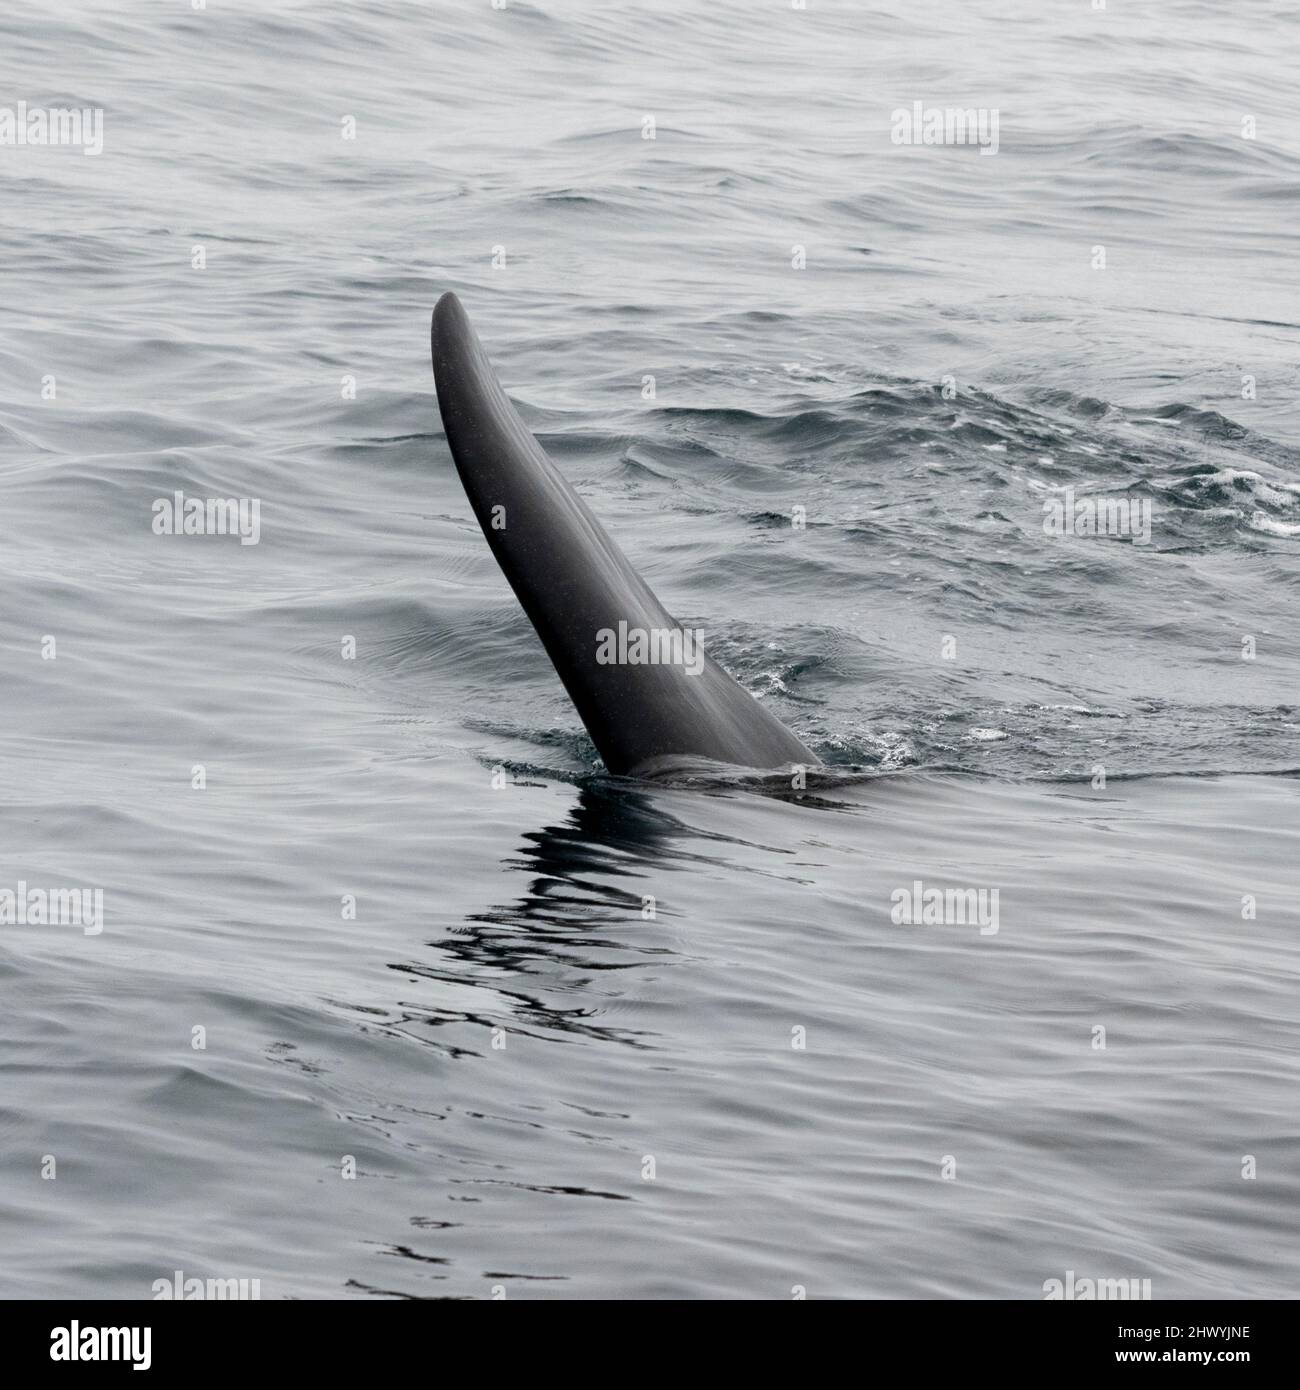 Dorasal Fin of an Orca Killer Whale breaching the ocean surface in the Johnstone Strait, North Vancouver Island, British Columbia, Canada Stock Photo